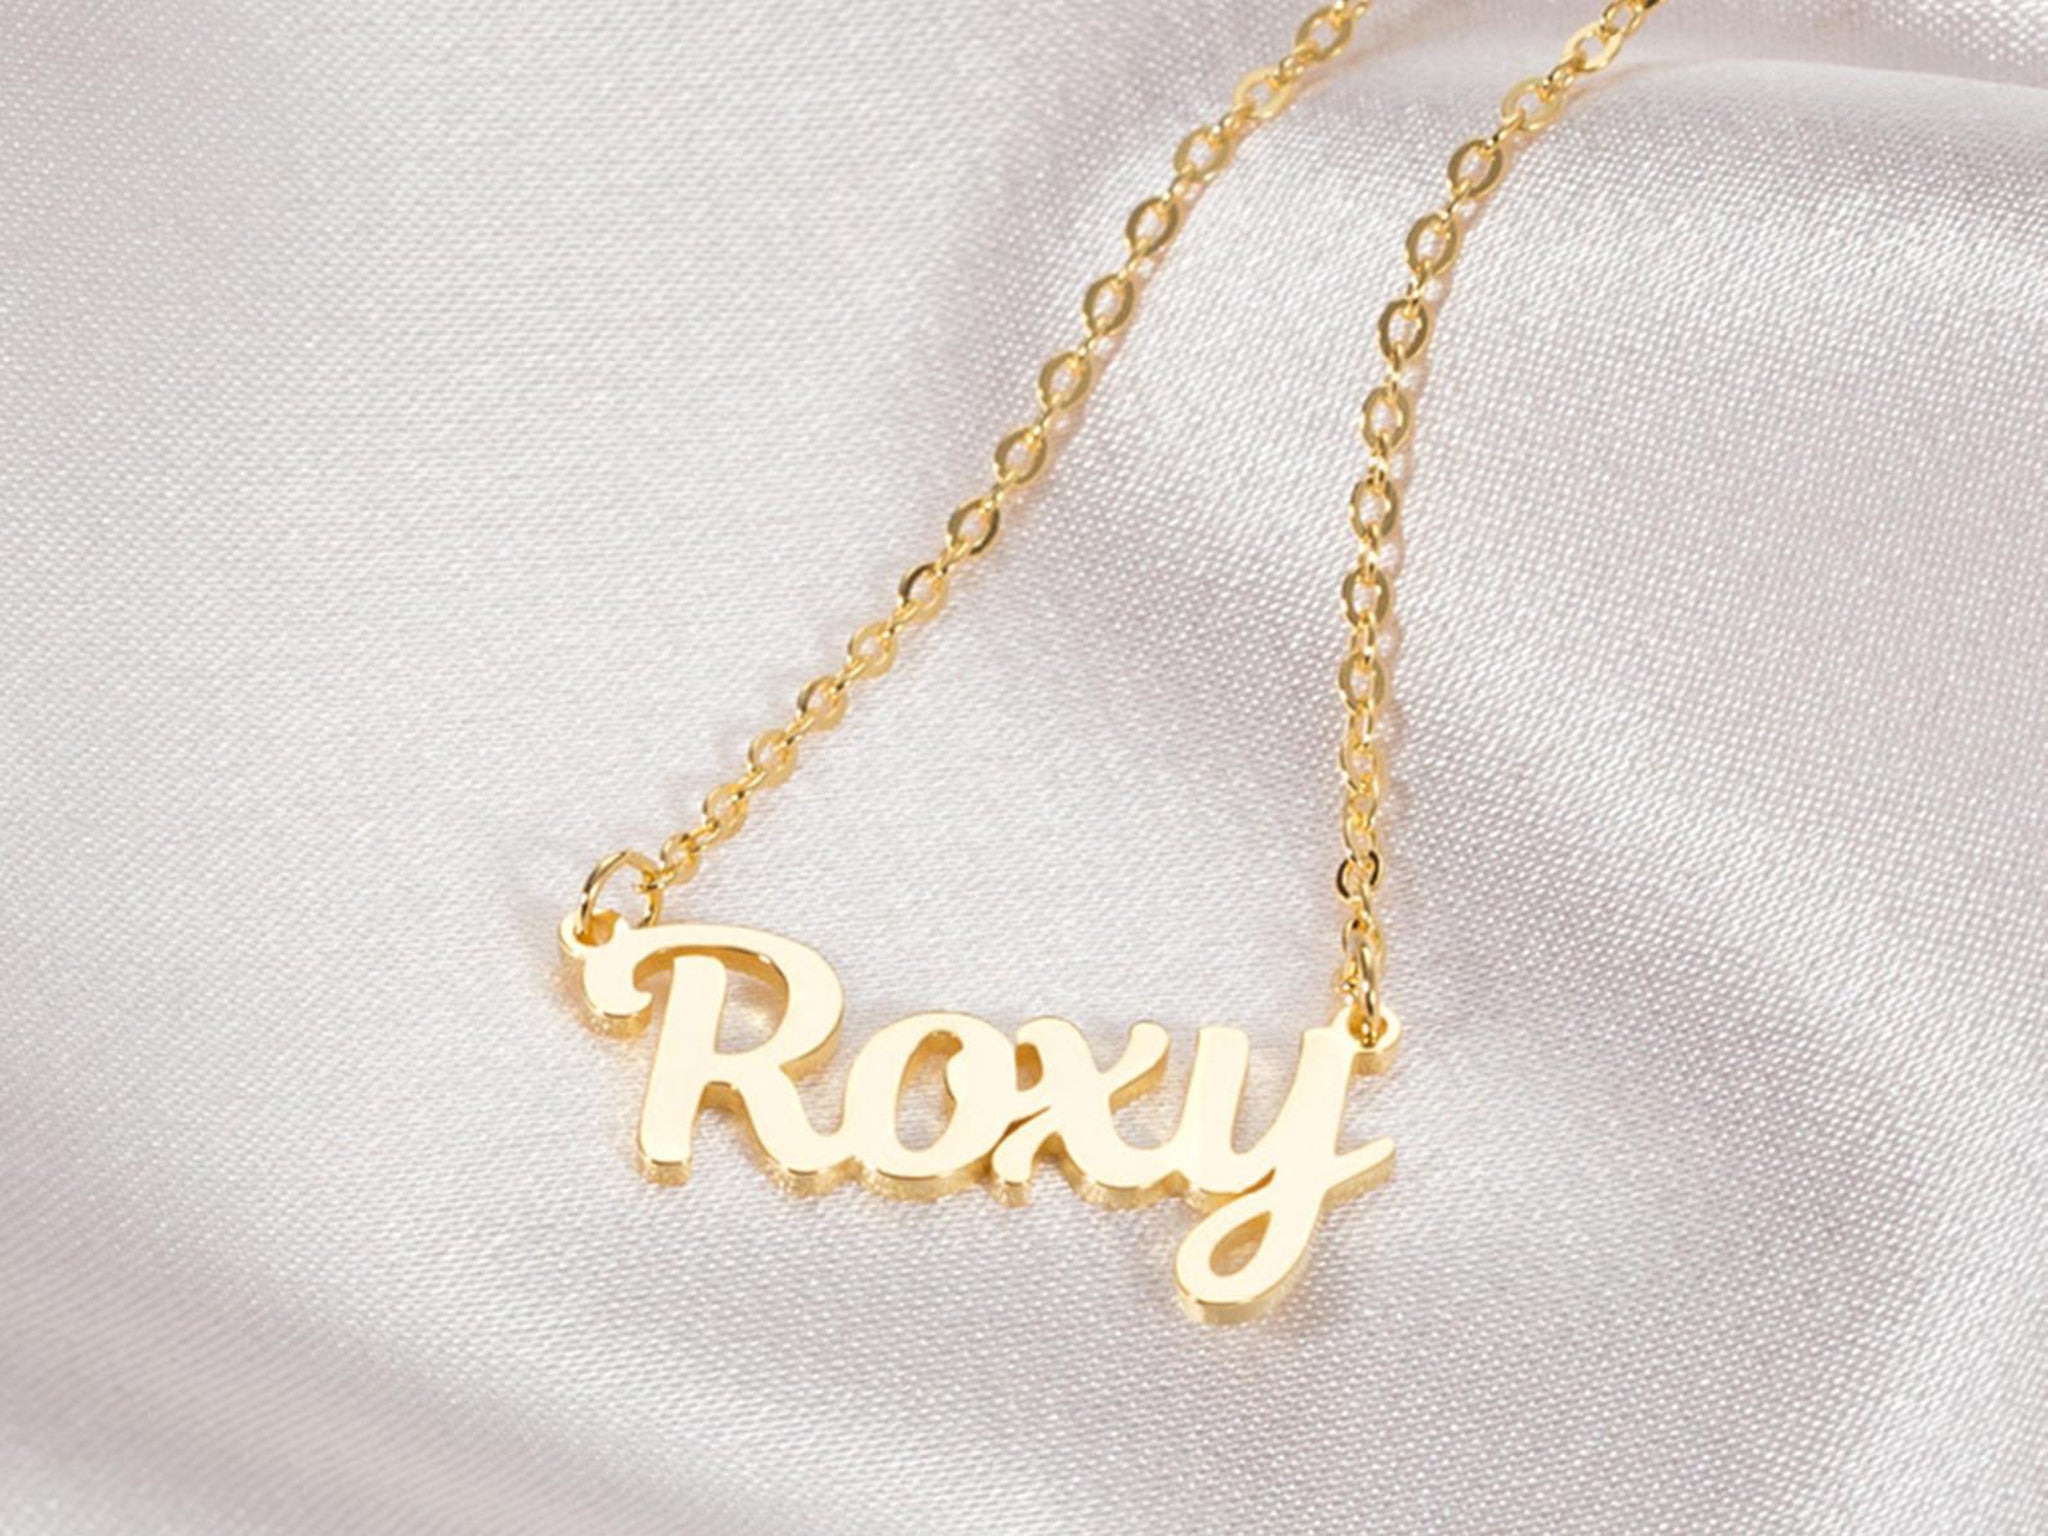 Beyoncé's nameplate necklace: Where to buy similar personalised styles